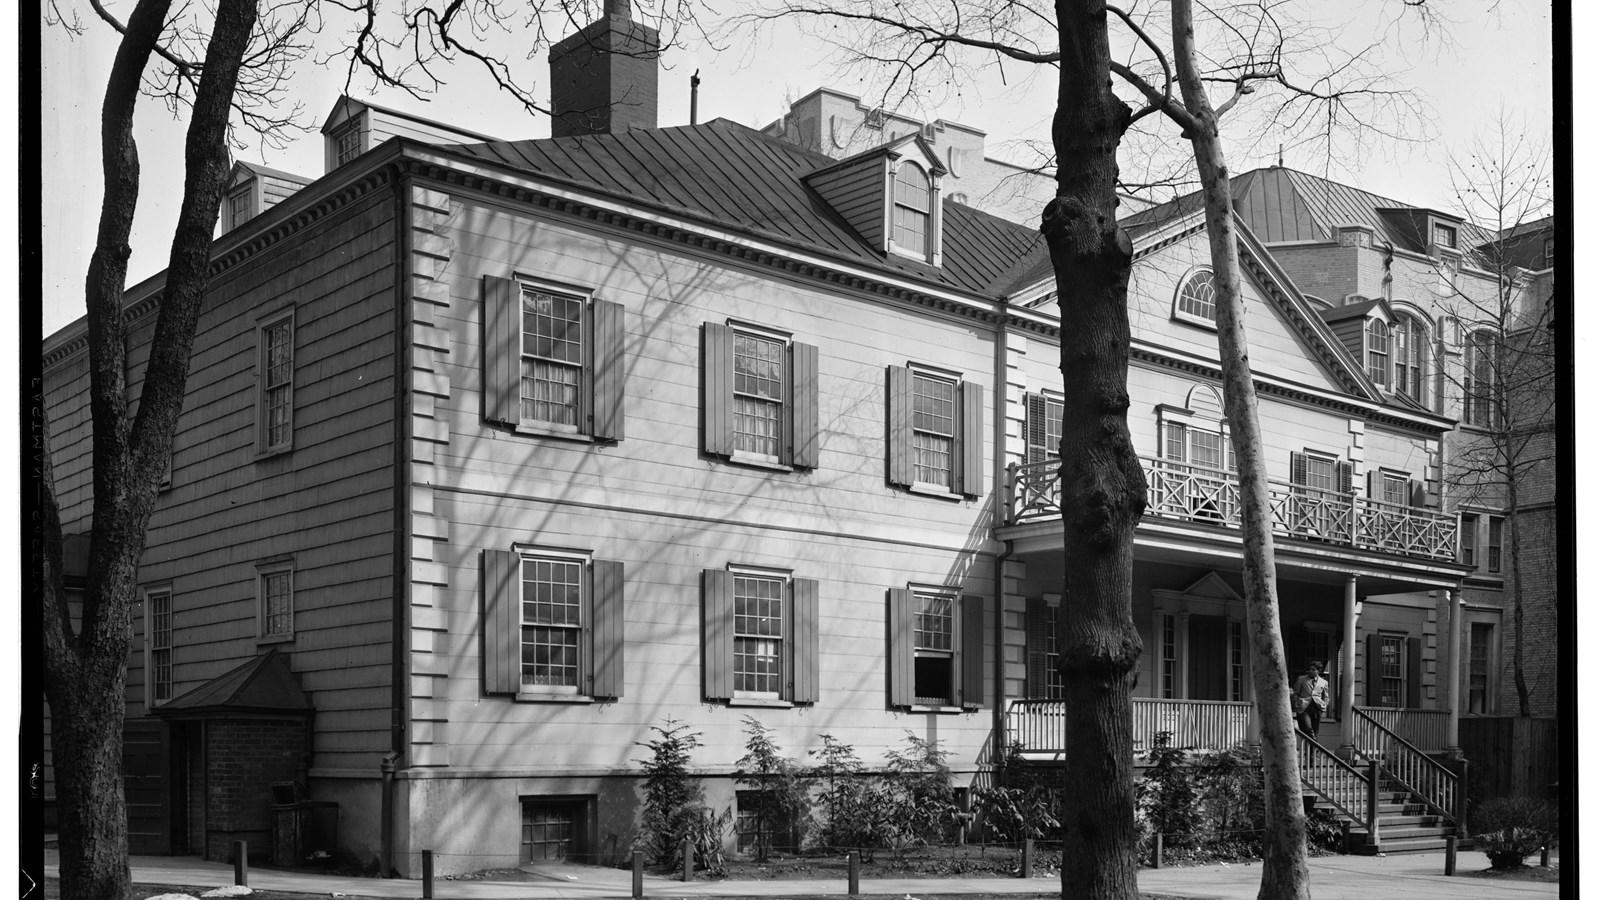 Exterior front of a two-story building with trees. Historic American Buildings Survey.